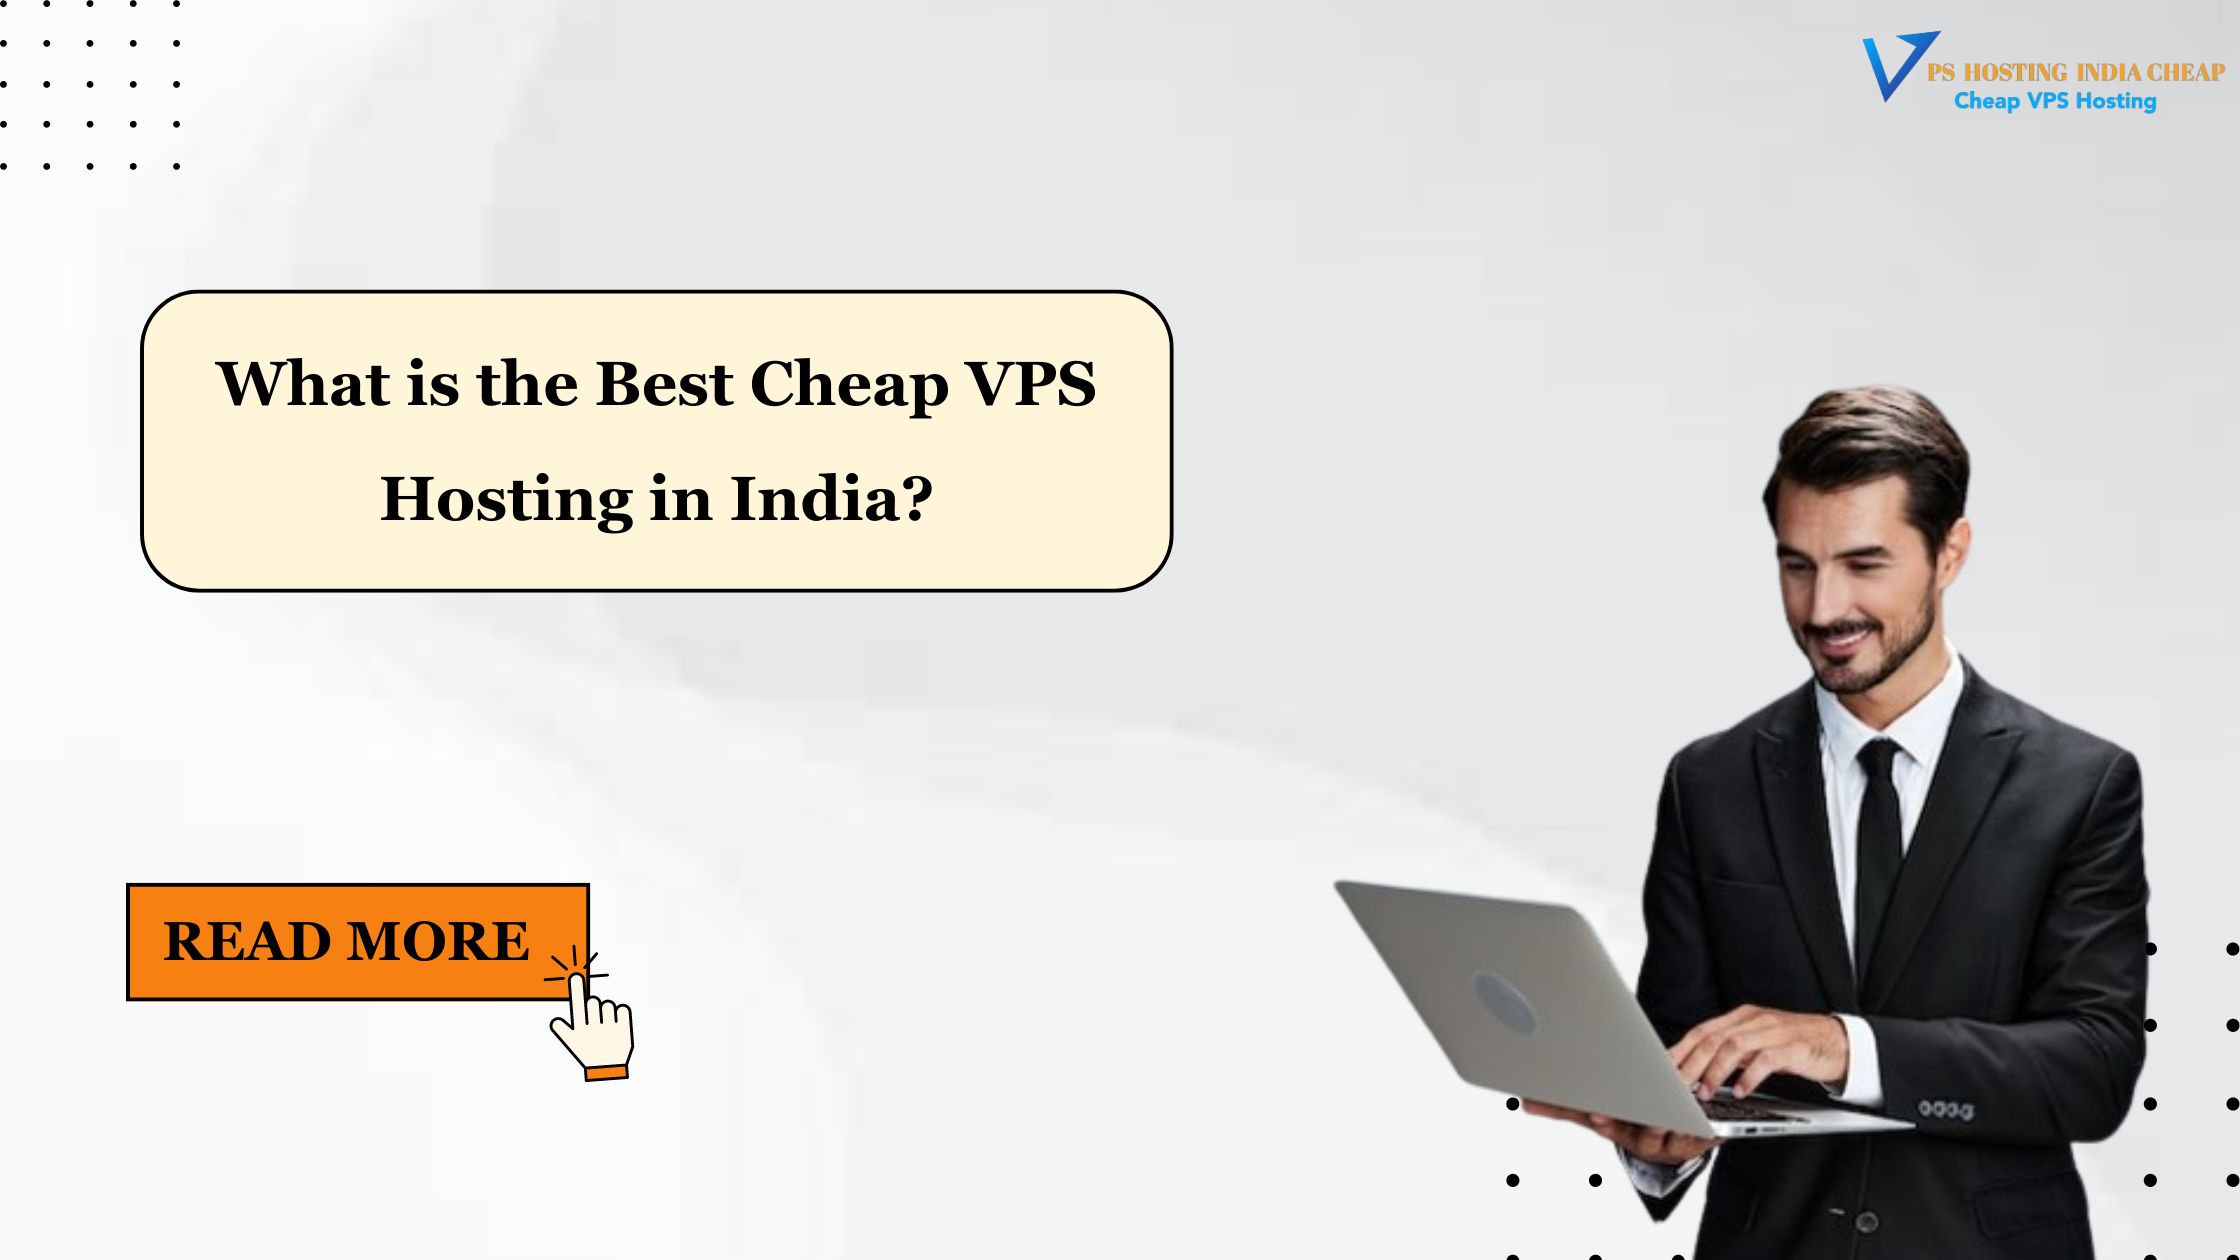 What is the Best Cheap VPS Hosting in India?